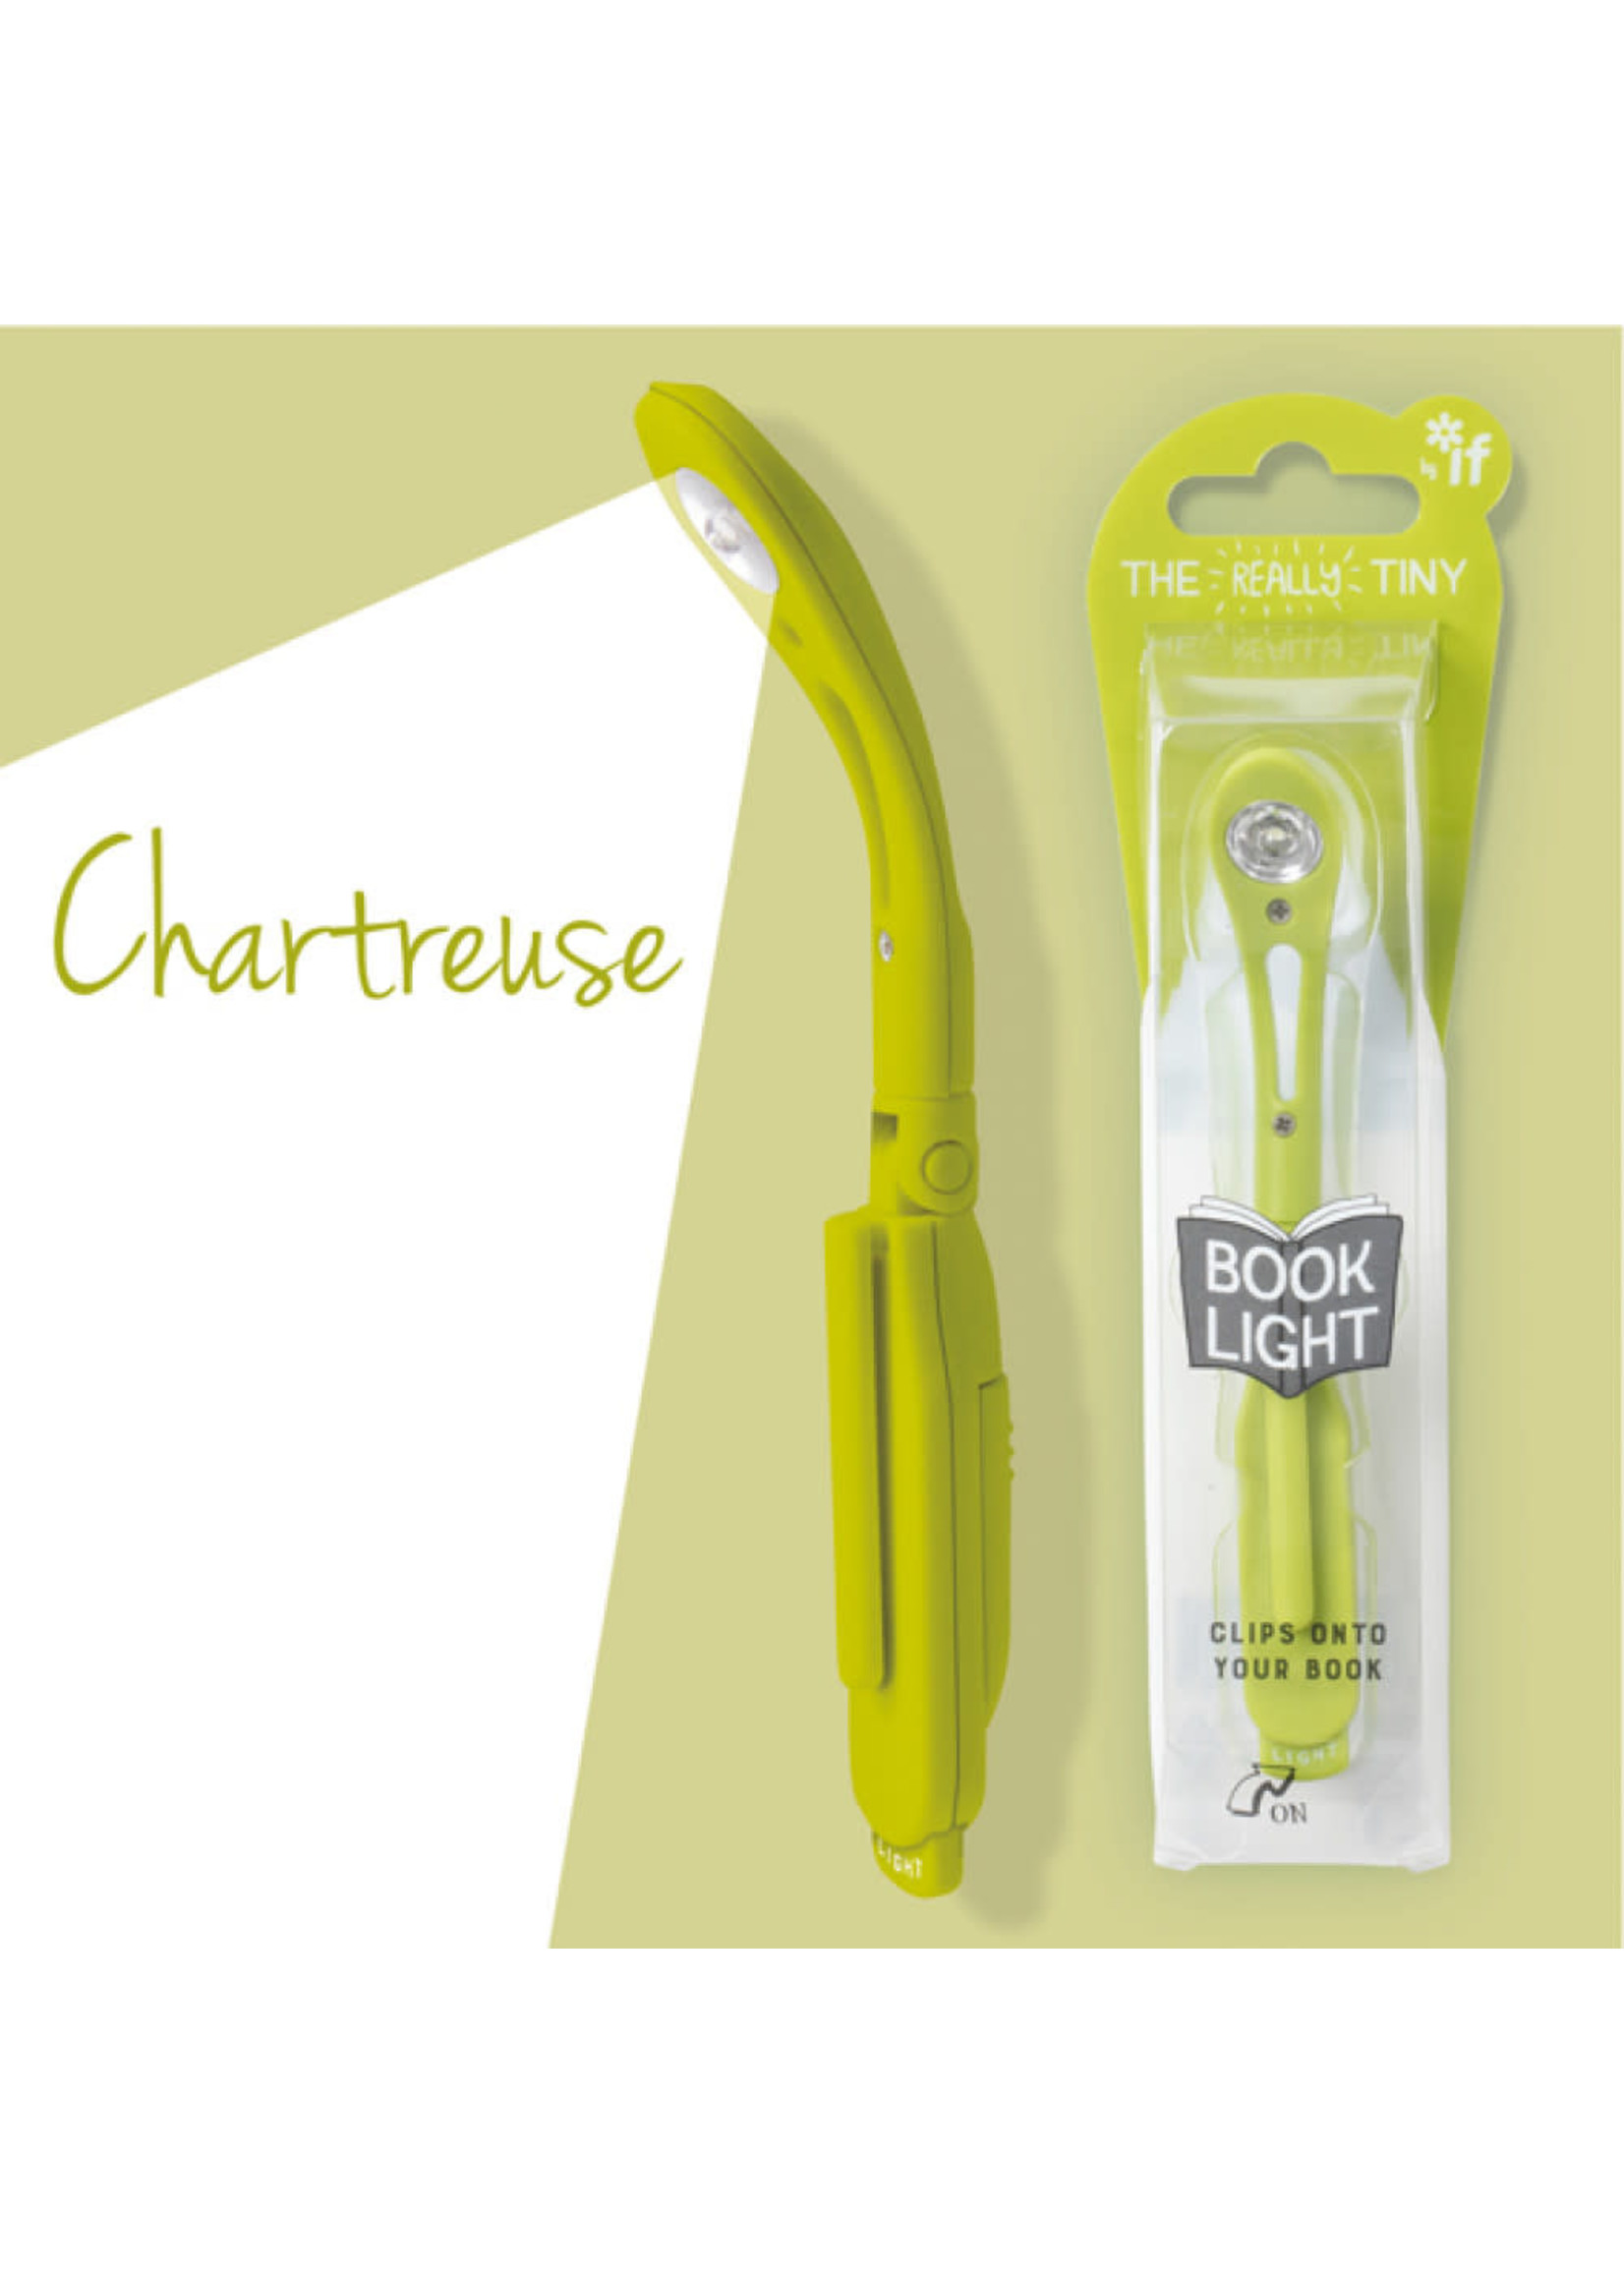 If The Really Tiny Book Light Chartreuse